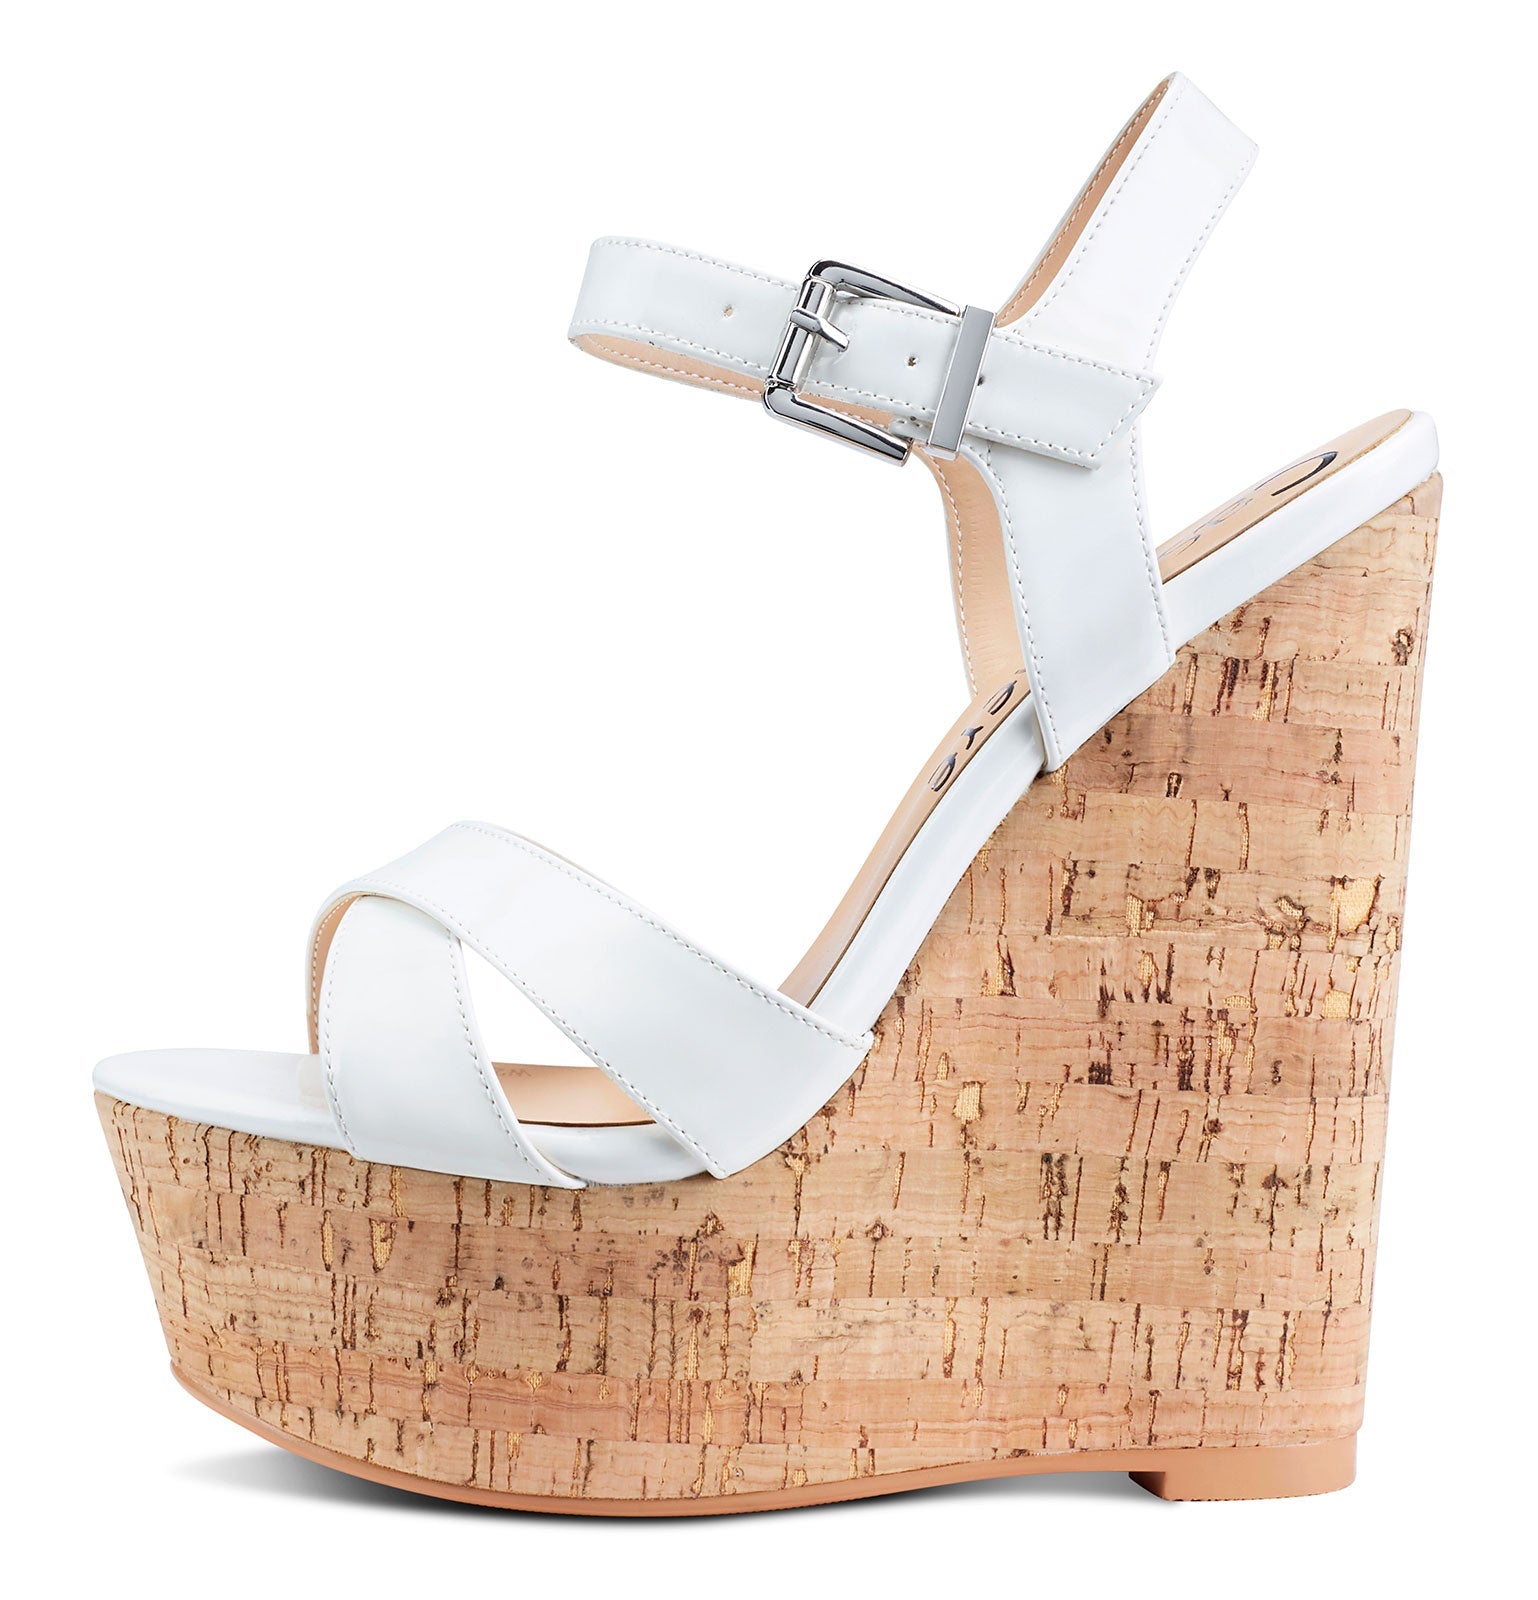 Ankle Wrap Closed Toe Espadrille Wedges | SHEIN USA | Closed toe  espadrilles, Espadrilles wedges, Womens shoes wedges